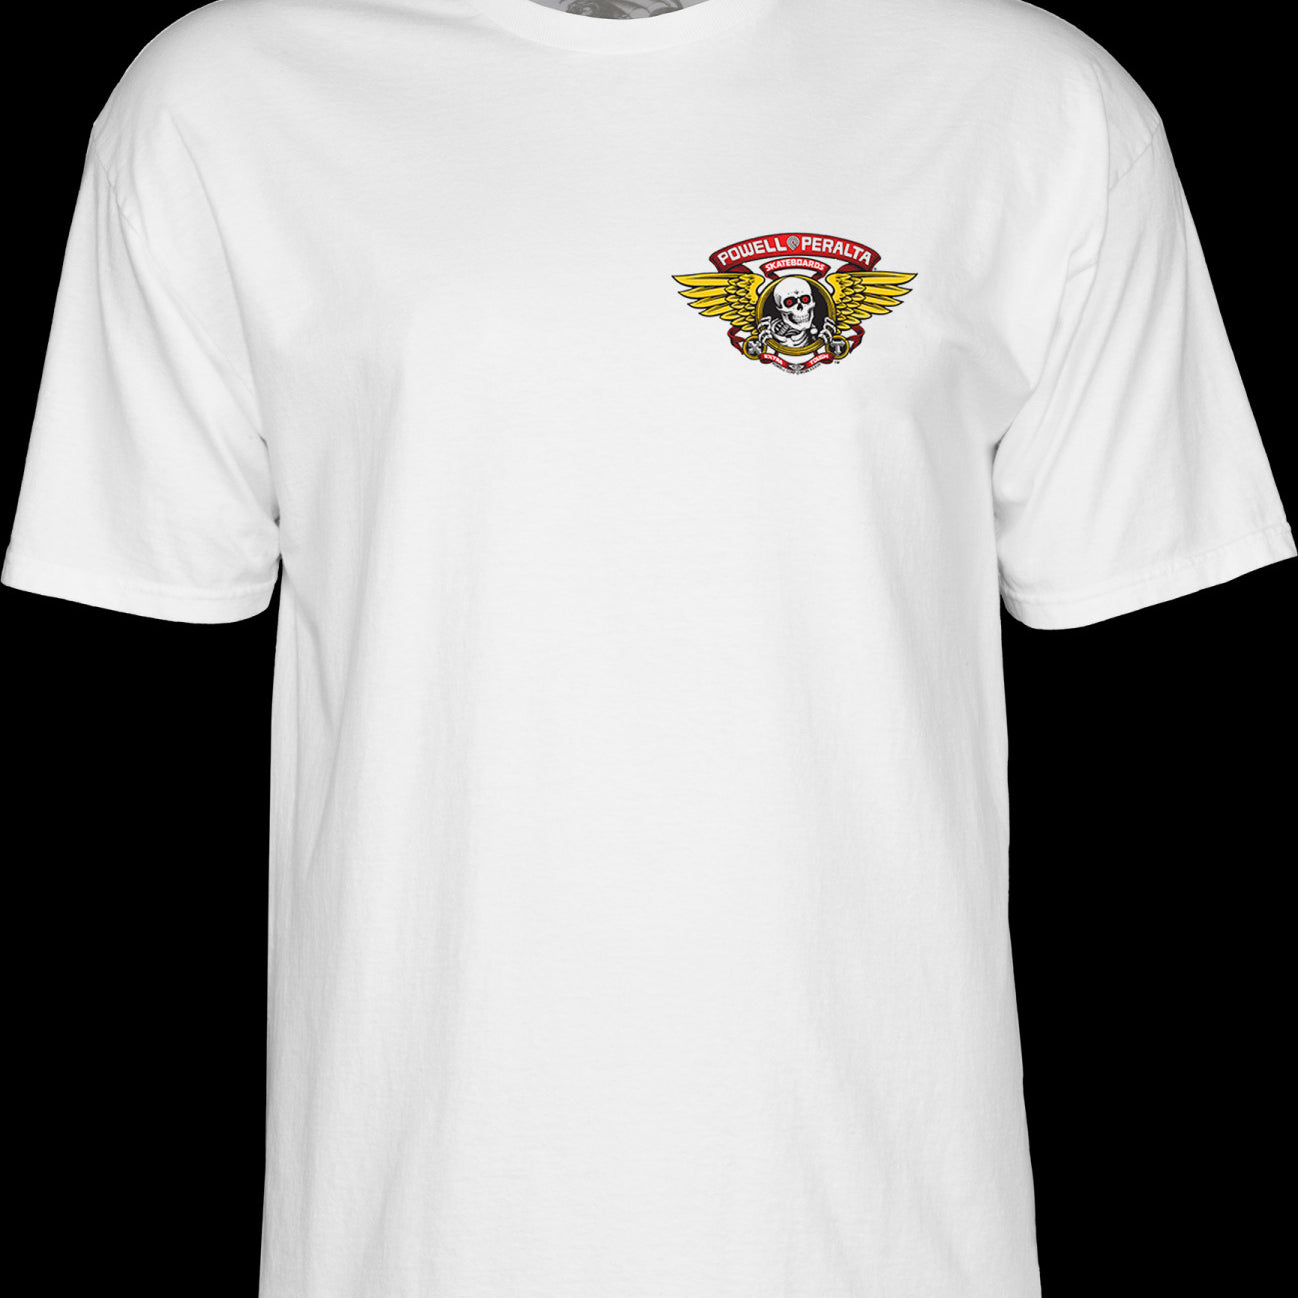 Powell Peralta Winged Ripper S/S Tee White S